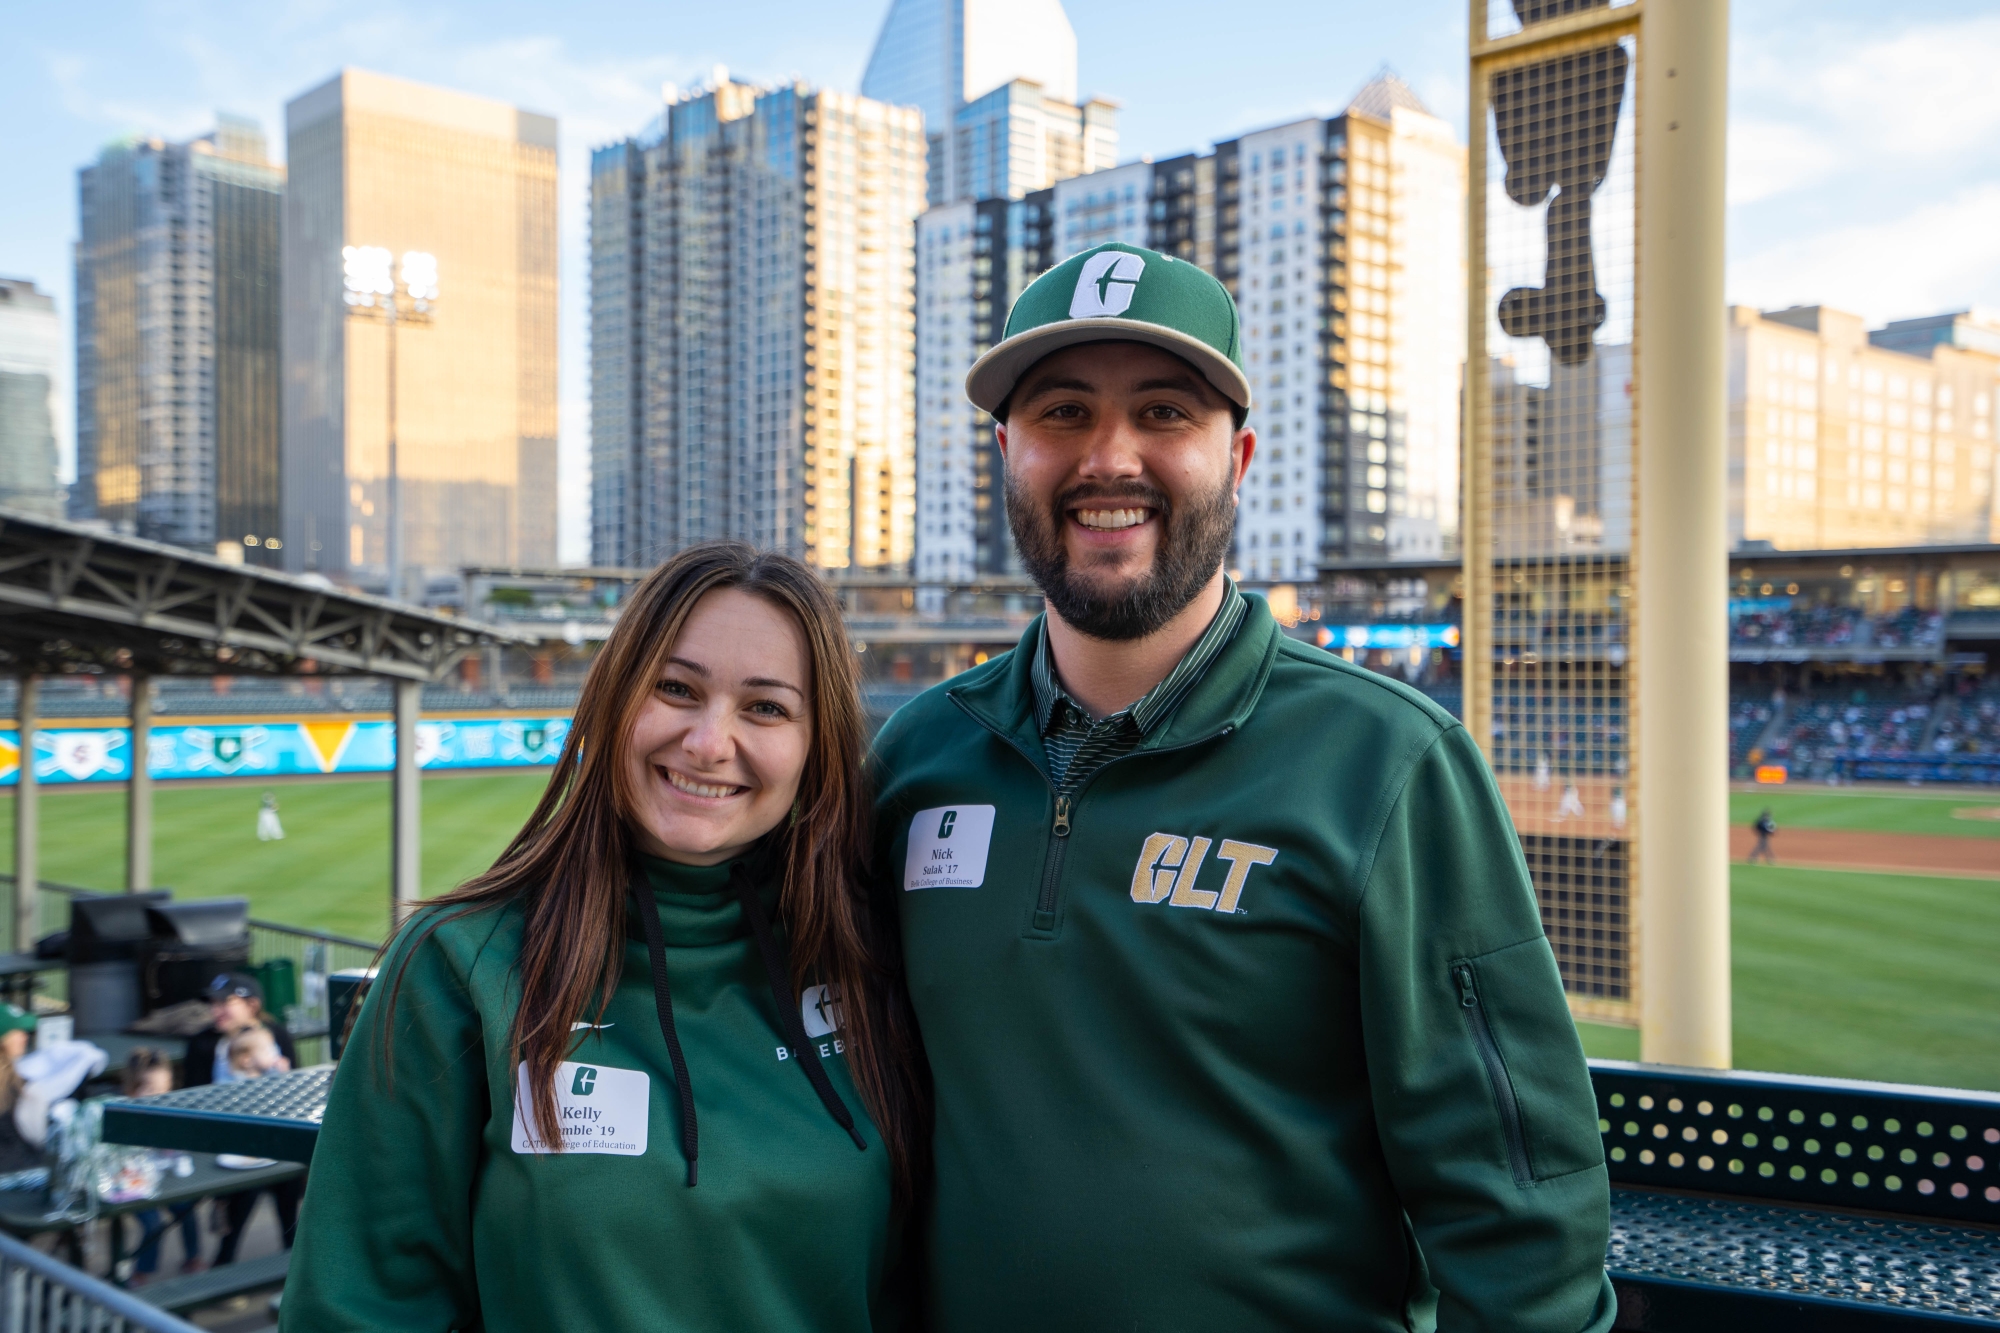 Alumni Business Niner Nick Sulak (right) at Truist Field in Uptown Charlotte